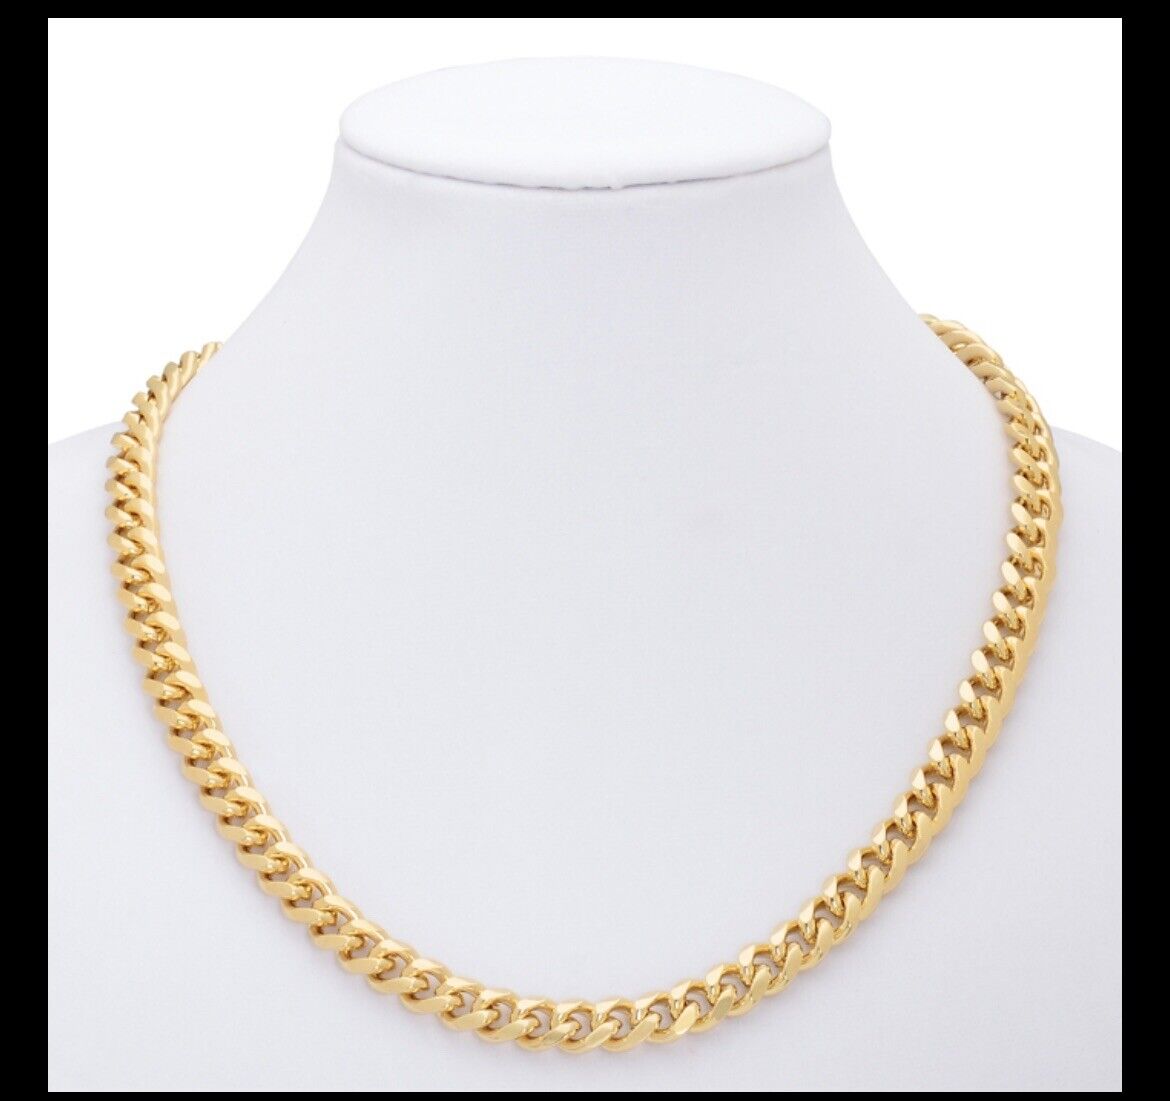 18K Gold Plated Layered Cuban Link / Curb Chain Necklace or Bracelet - Warranty Mr Value - фотография #5